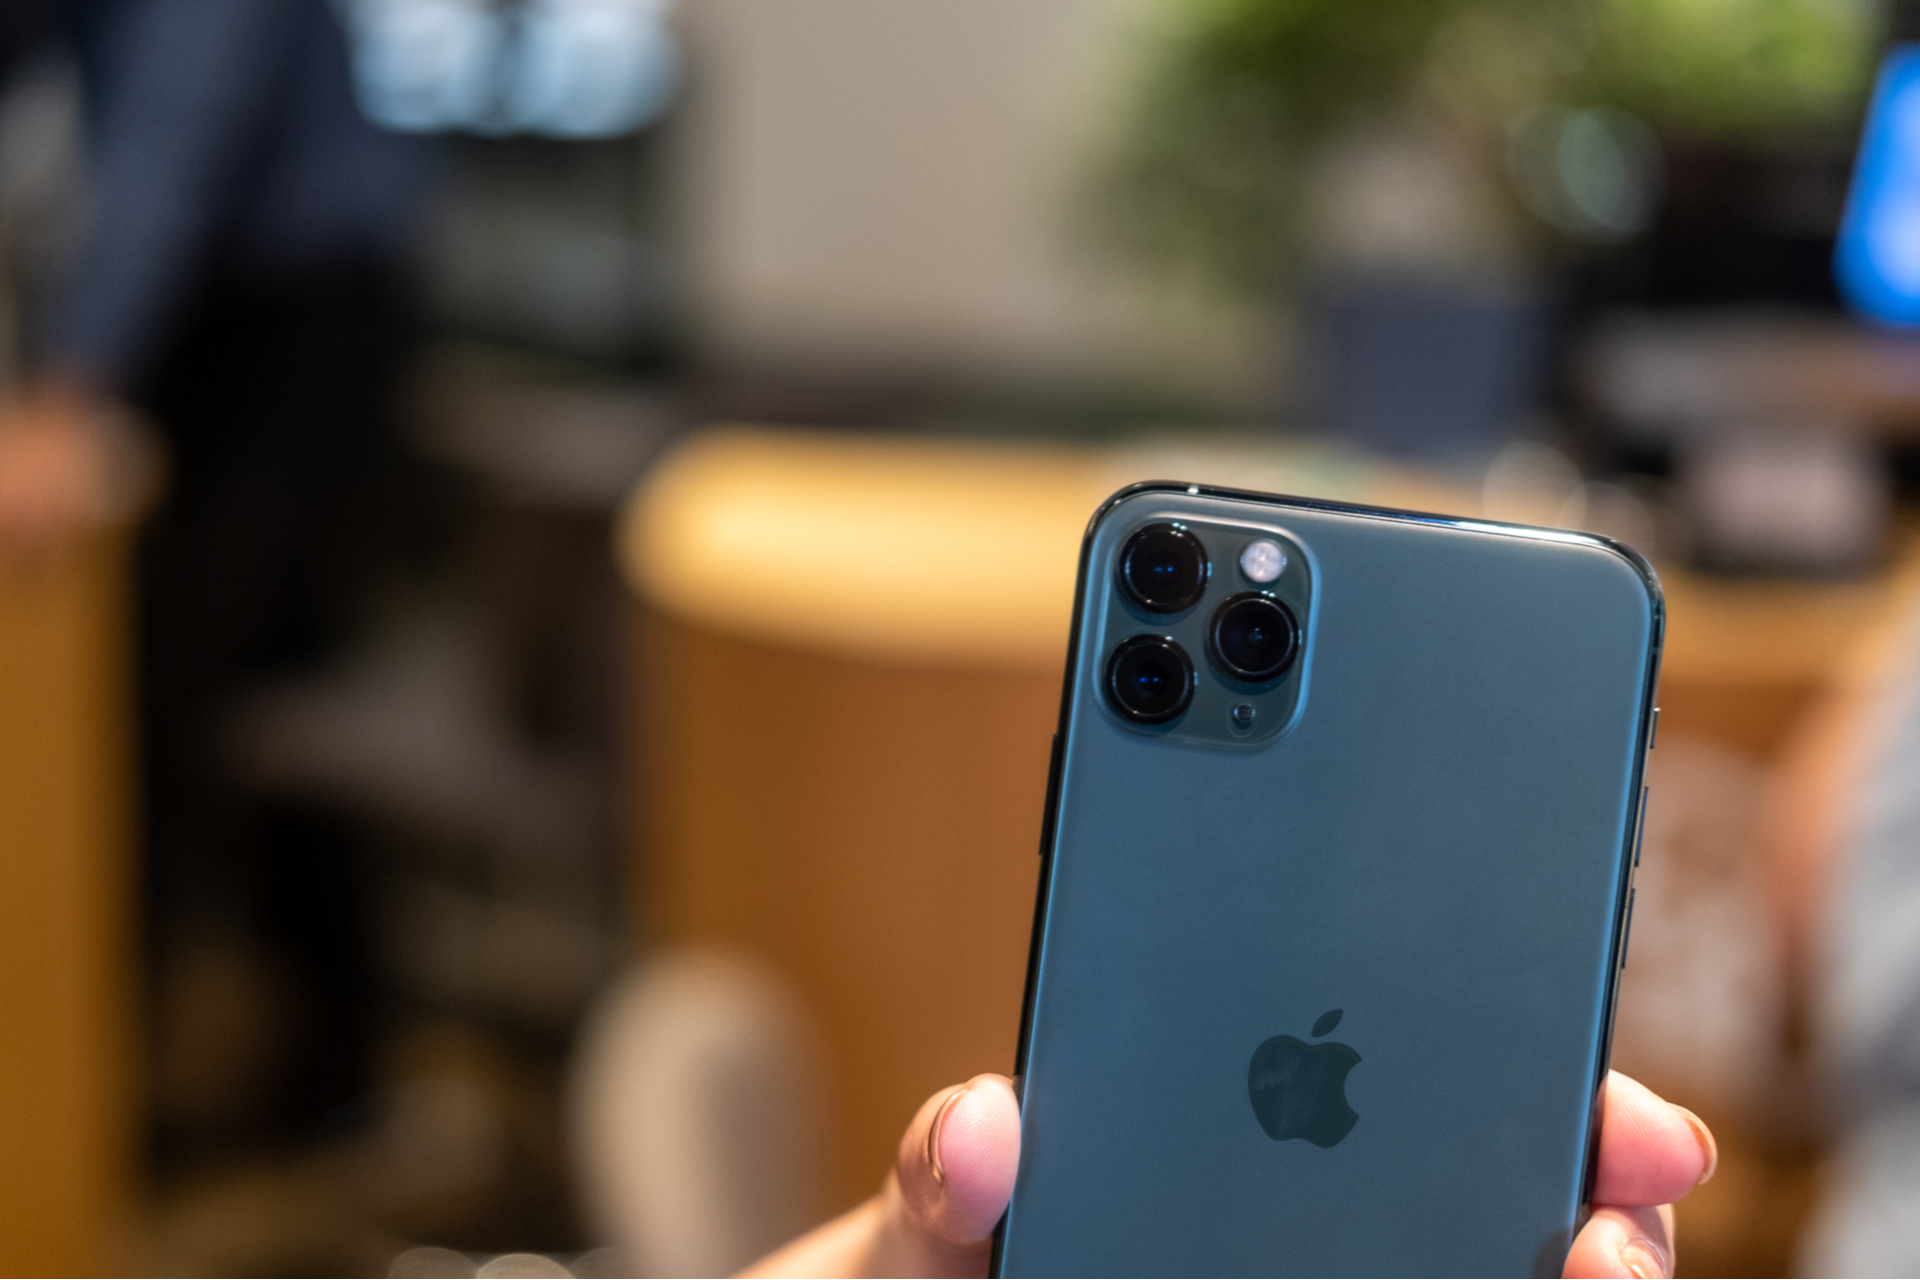 iPhone 11 Pro Max OLED Display Technology Shoot-Out